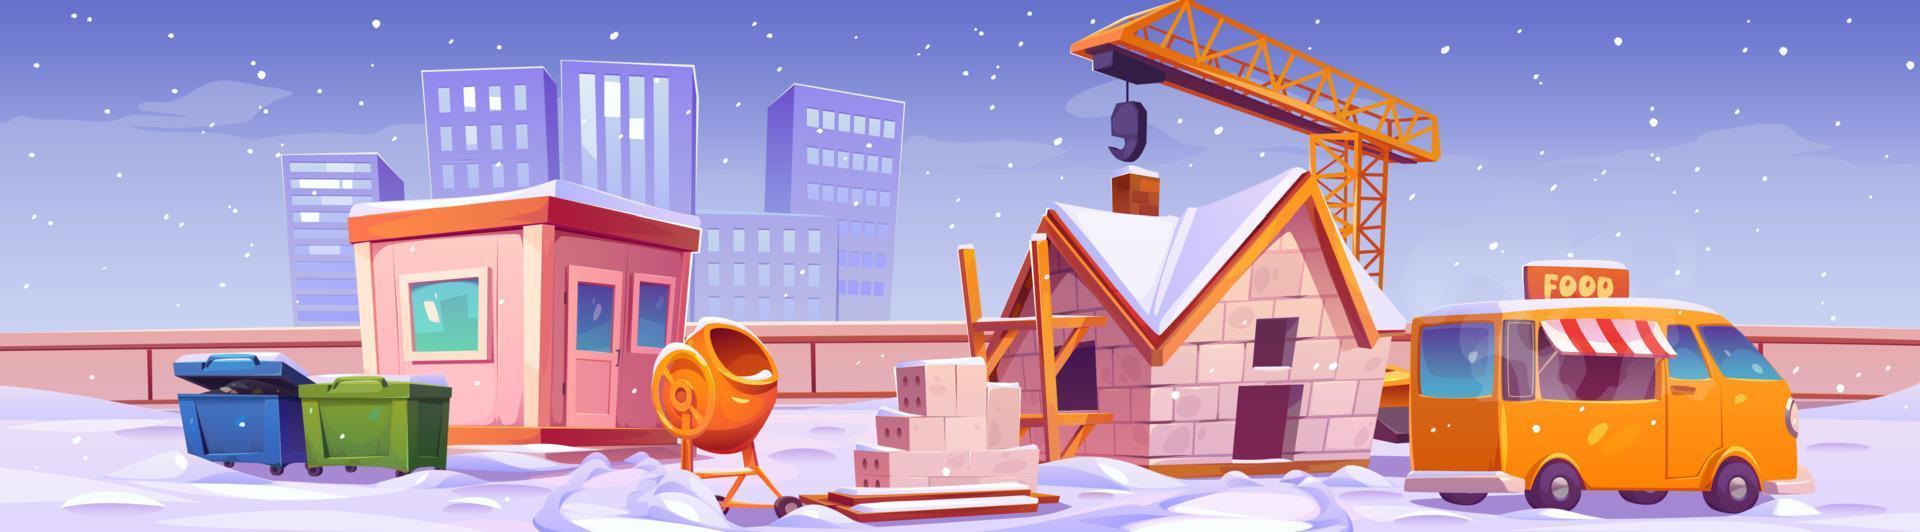 Winter landscape with construction site vector